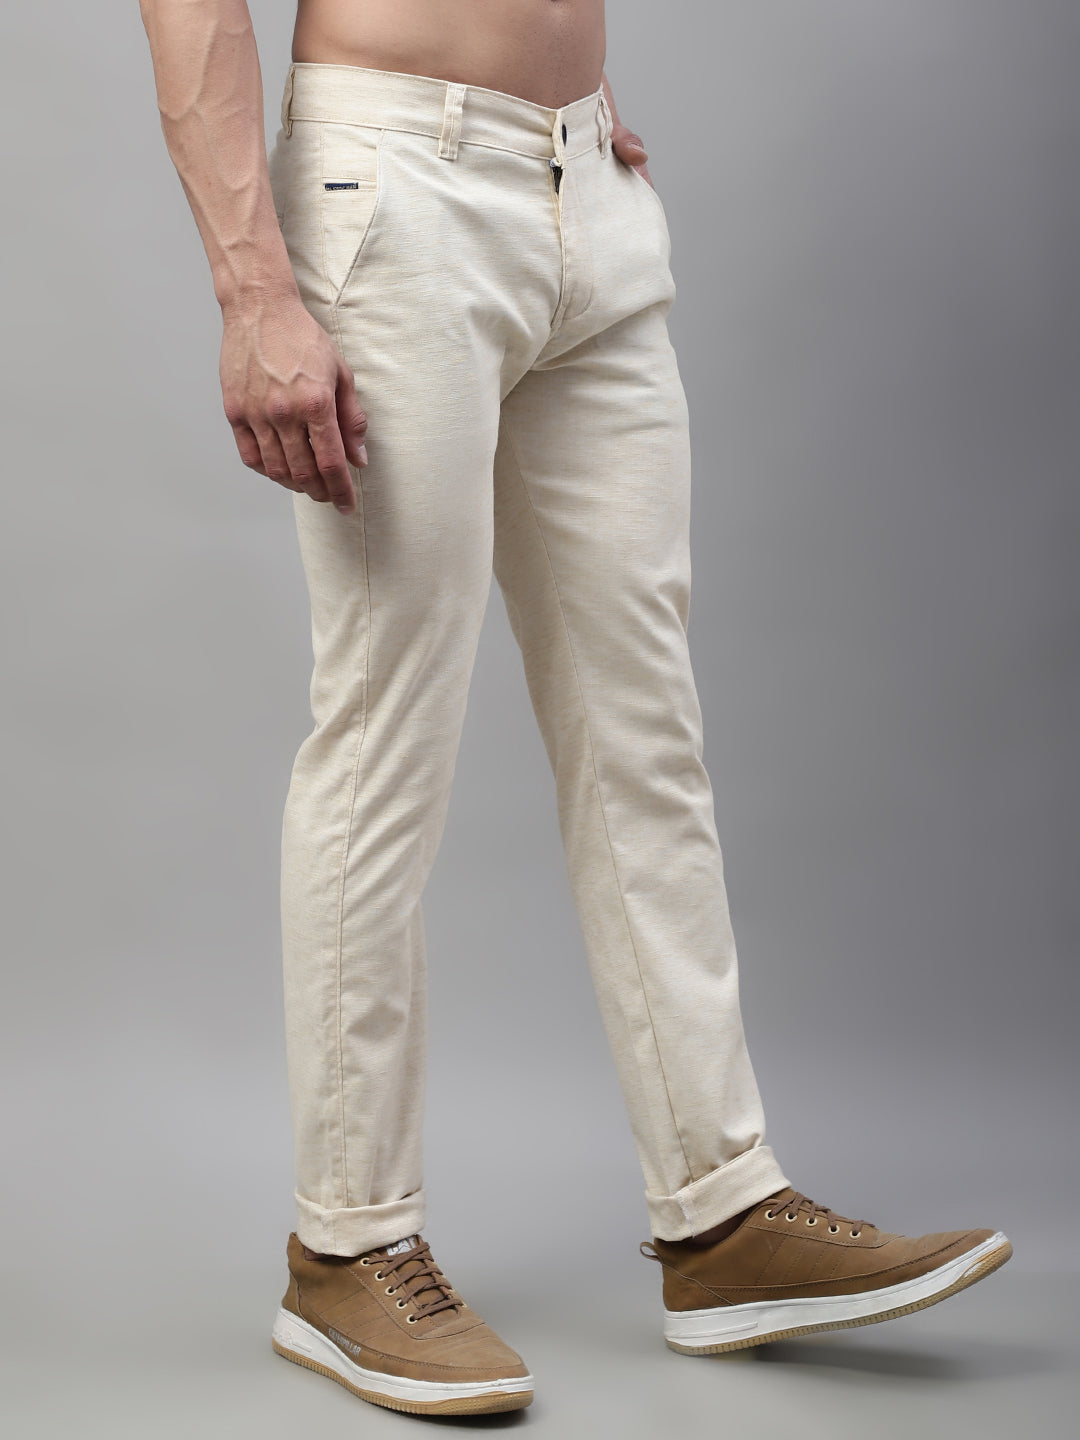 Majestic Man Regular Fit Pattern Finish Cotton Casual Solid Chinos Trouser - Cream